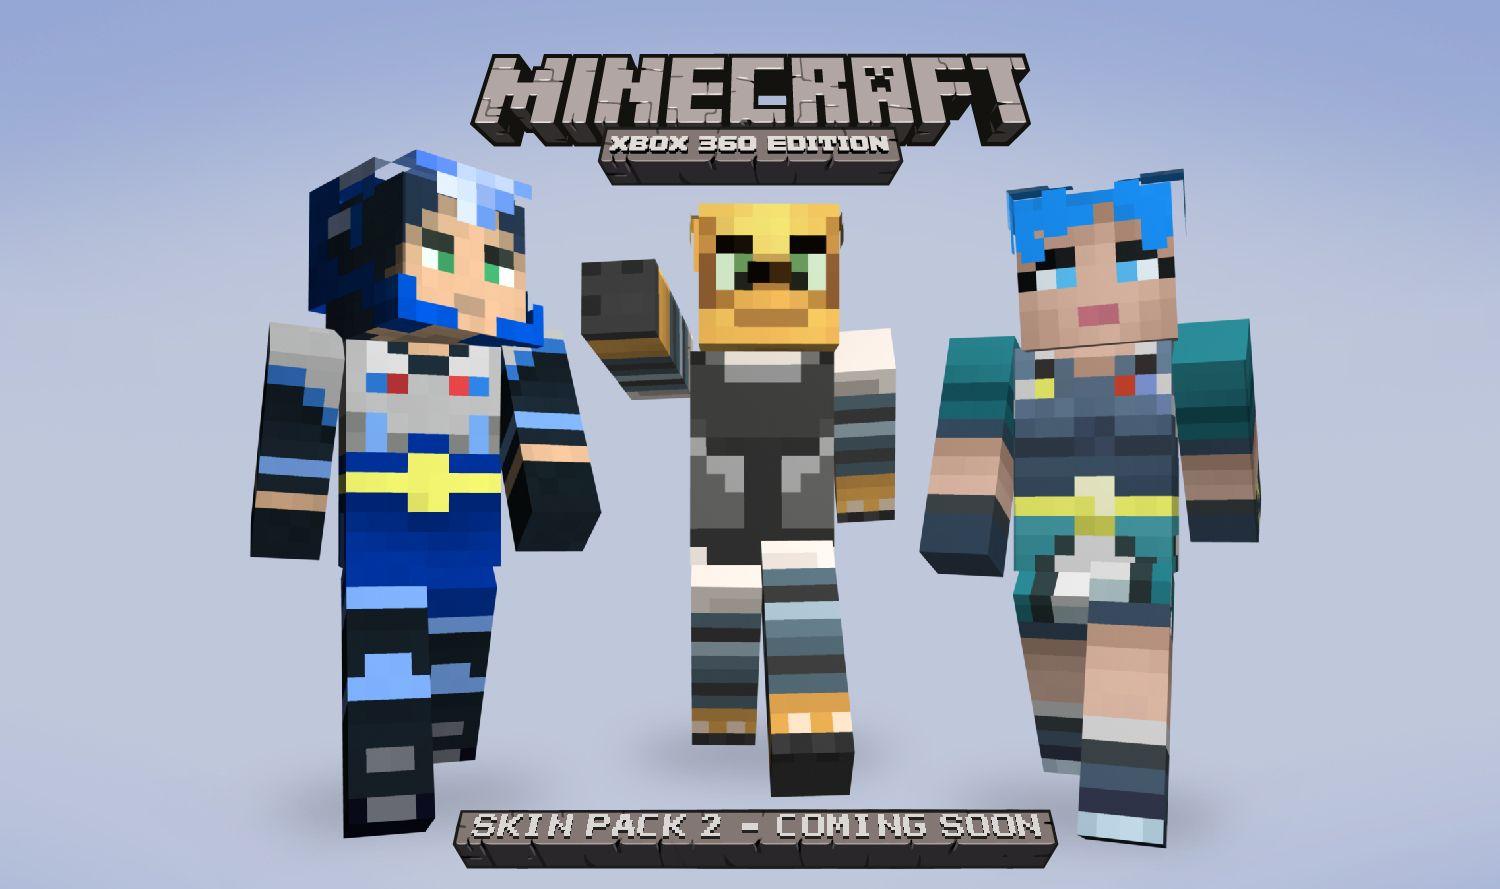 Jet Force Gemini image Minecraft Skins HD wallpaper and background